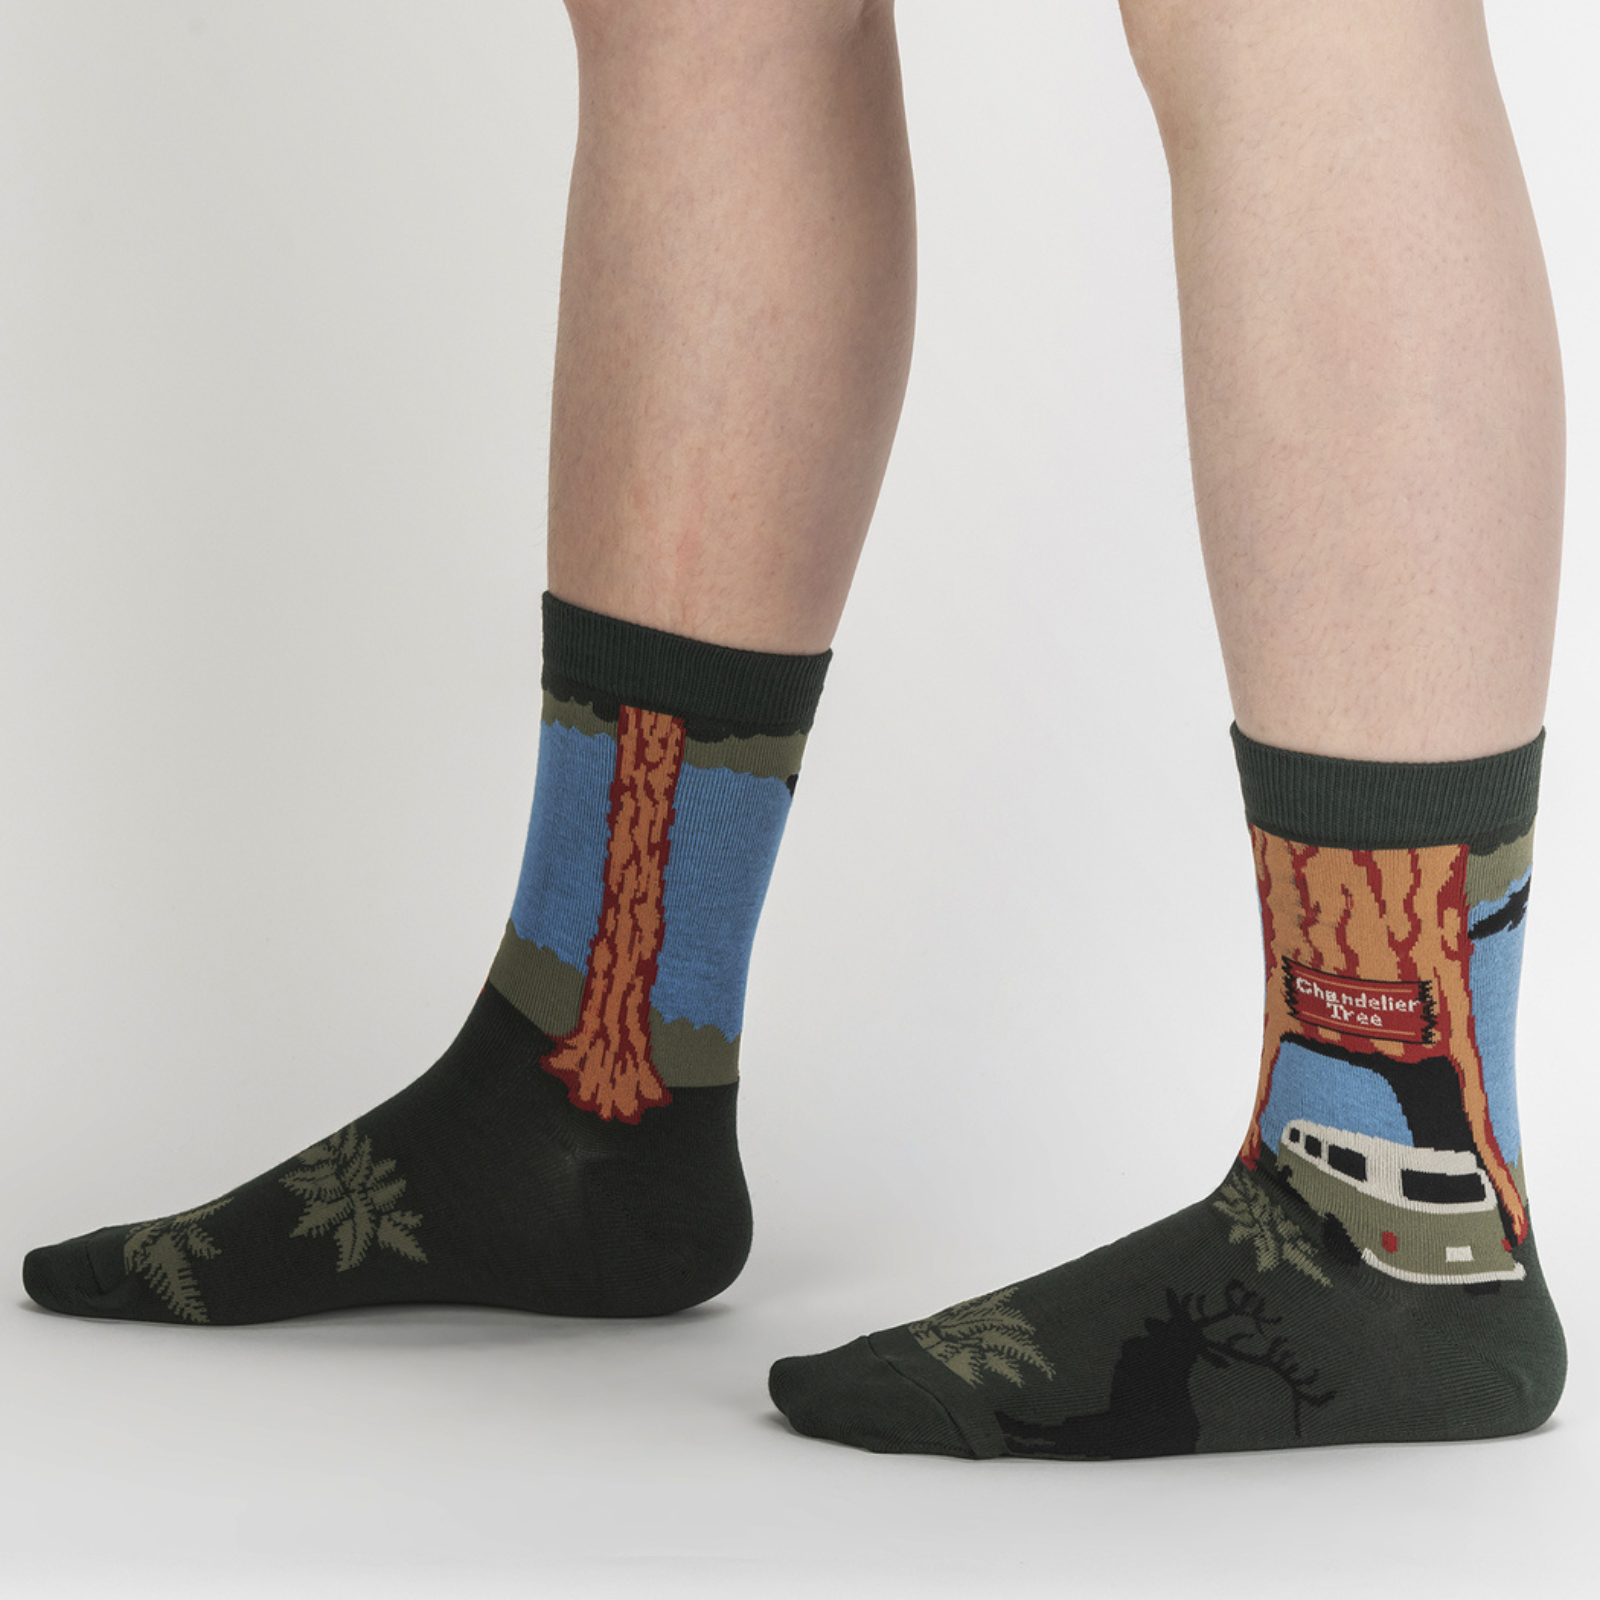 Sock It To Me Redwoods women's and men's sock featuring VW Van driving through Chandelier Tree redwood worn by female model from side